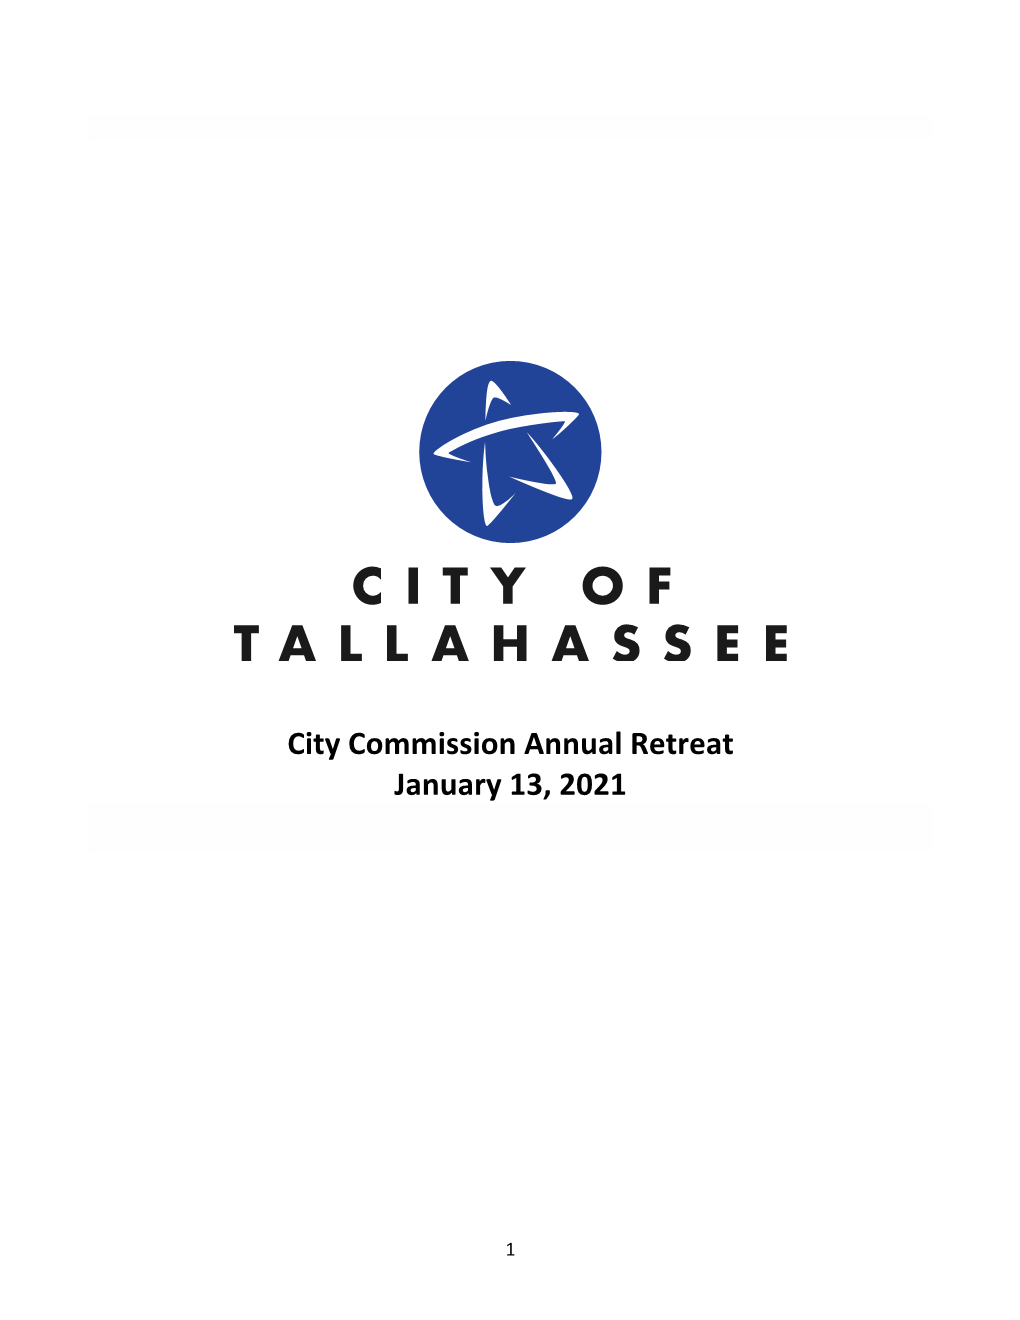 City Commission Annual Retreat January 13, 2021